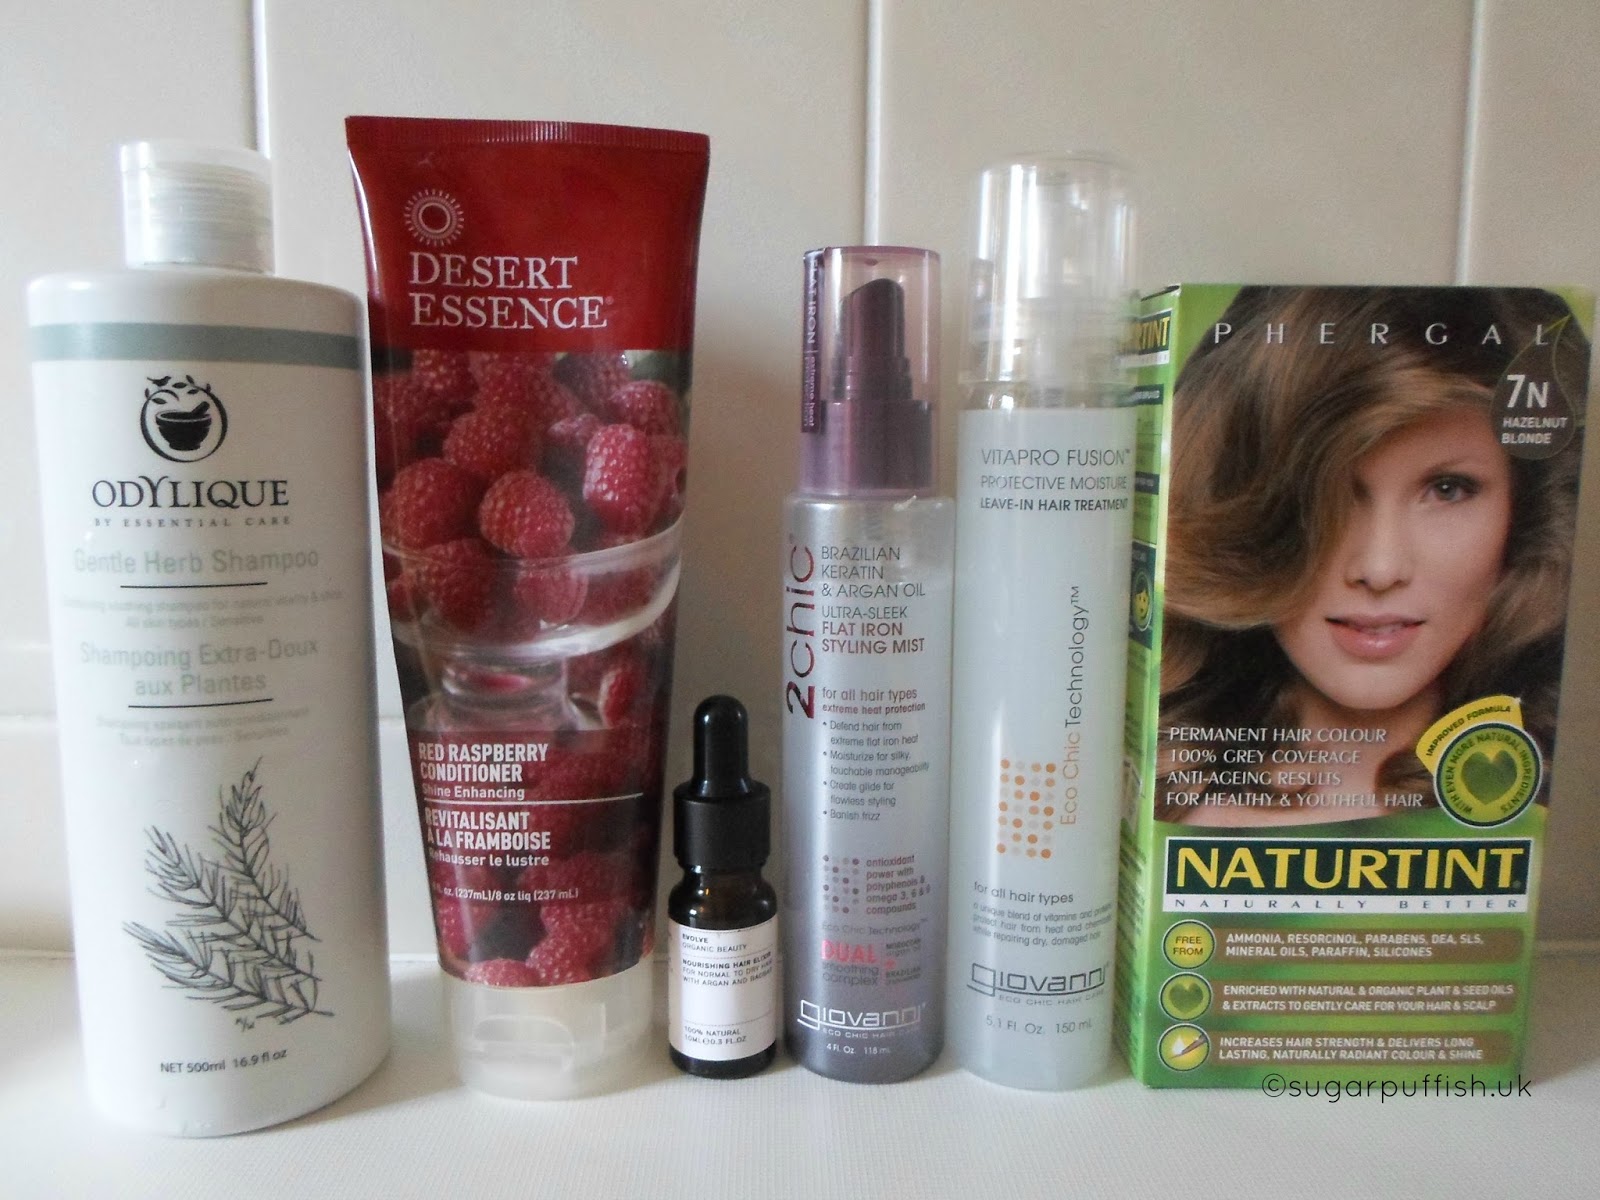 Natural and Organic Haircare Routine 2016 featuring Odylique, Giovanni, Desert Essence, Naturtint